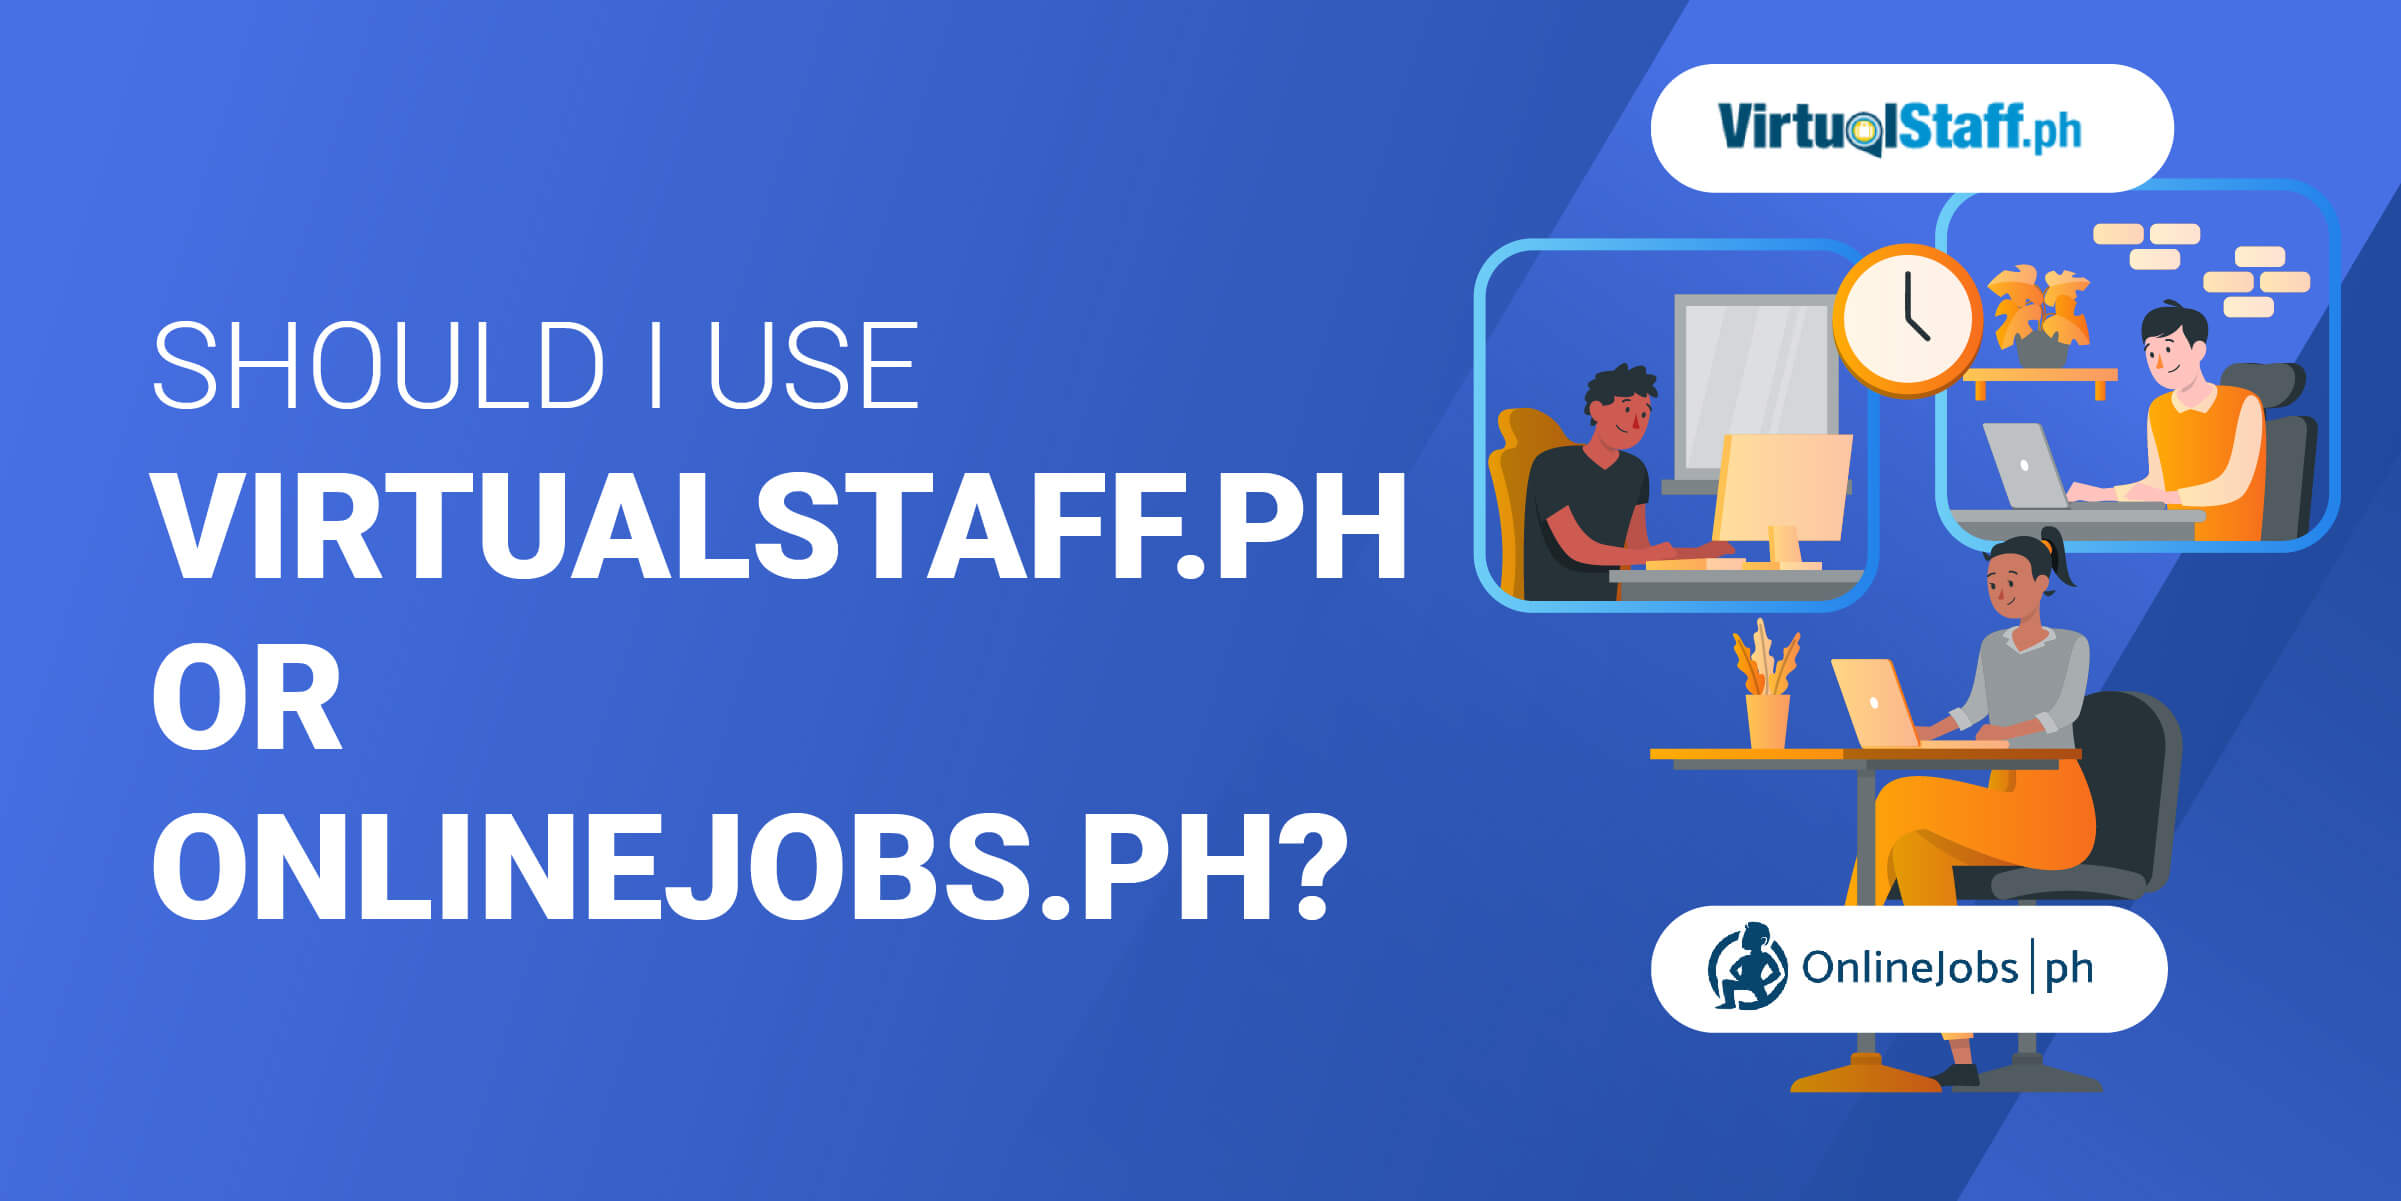 Should I Use OnlineJobs or VirtualStaff